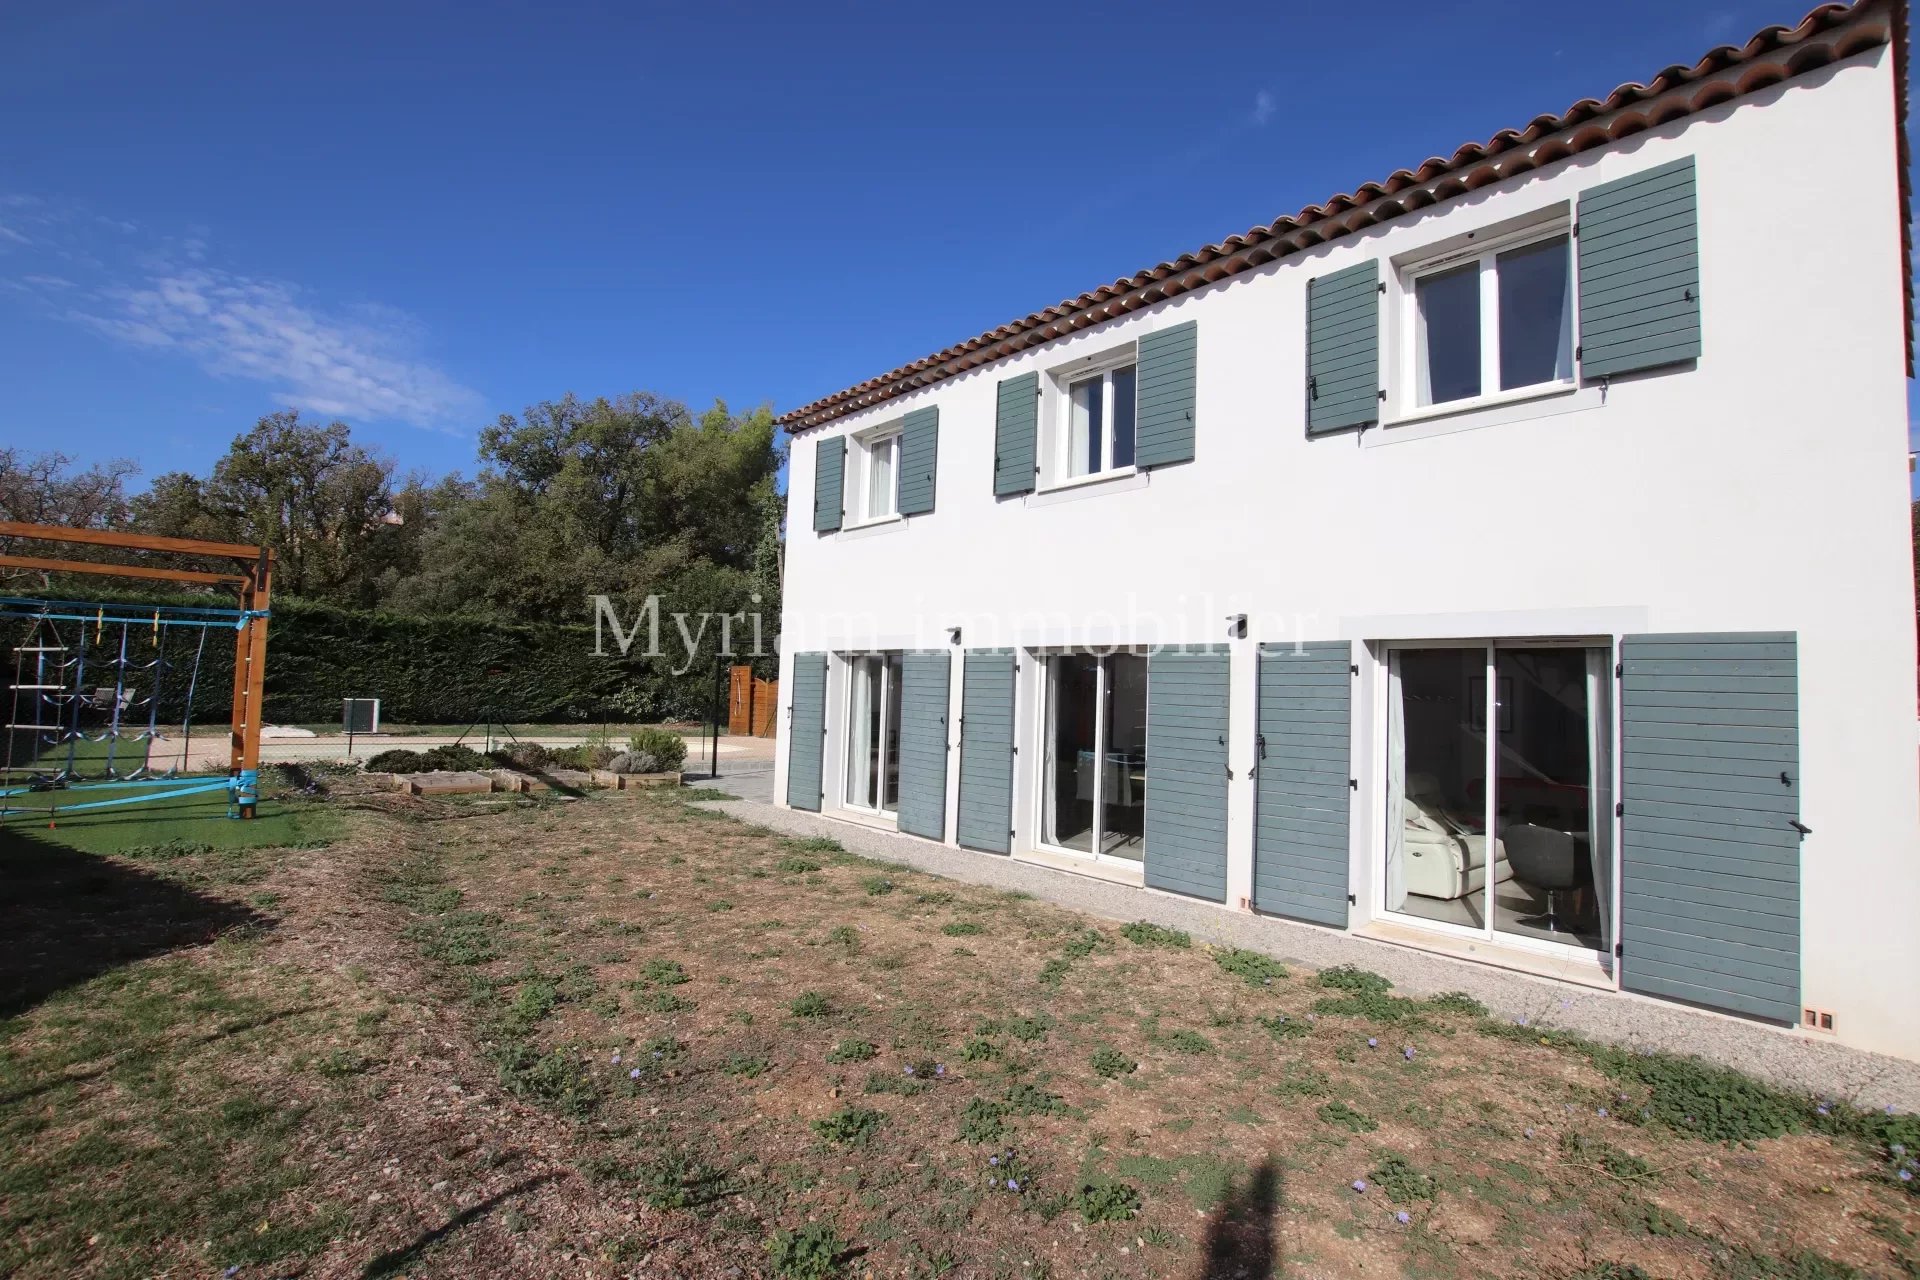 new 4-room house with swimming pool in CABRIS